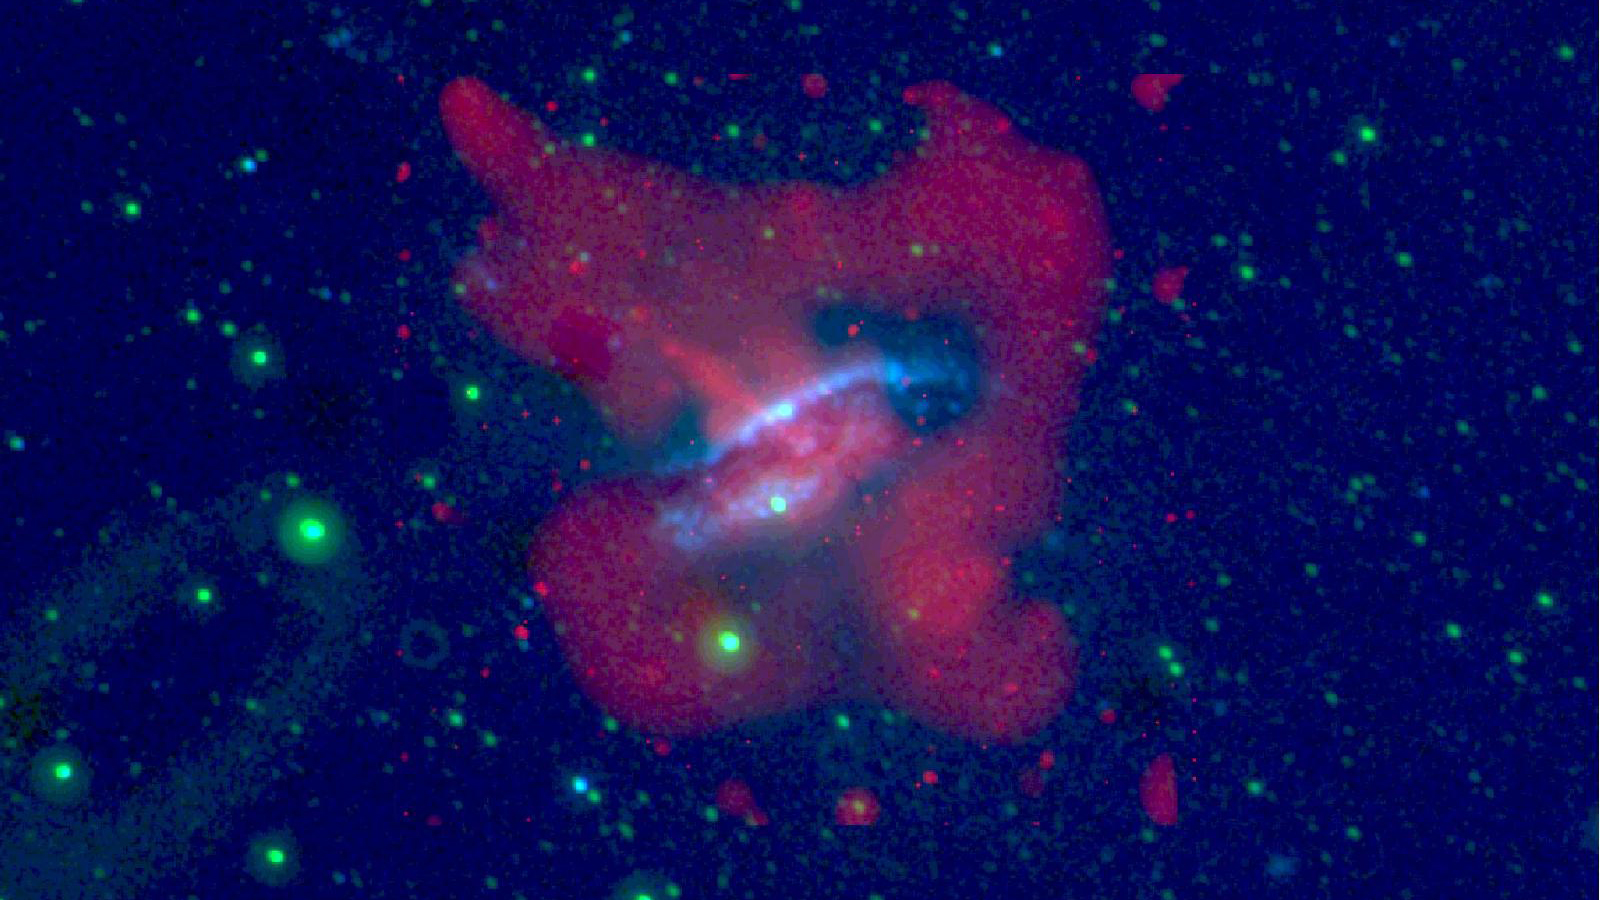 News Intriguing Celestial Image Arrive From Galaxy Mission